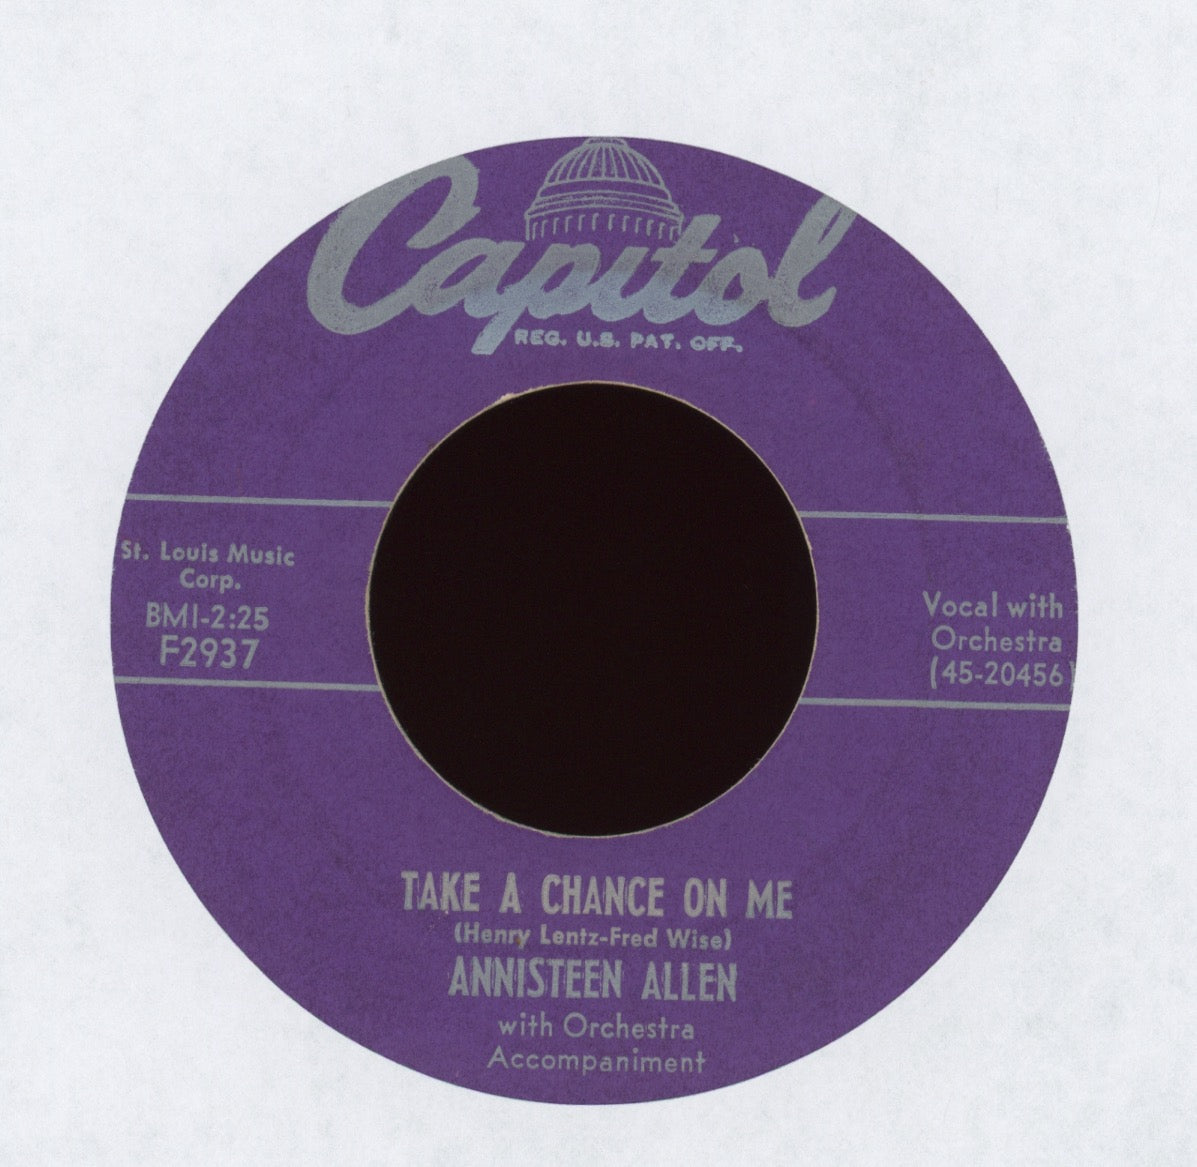 Annisteen Allen - Take A Chance On Me on Capitol R&B Mambo 45